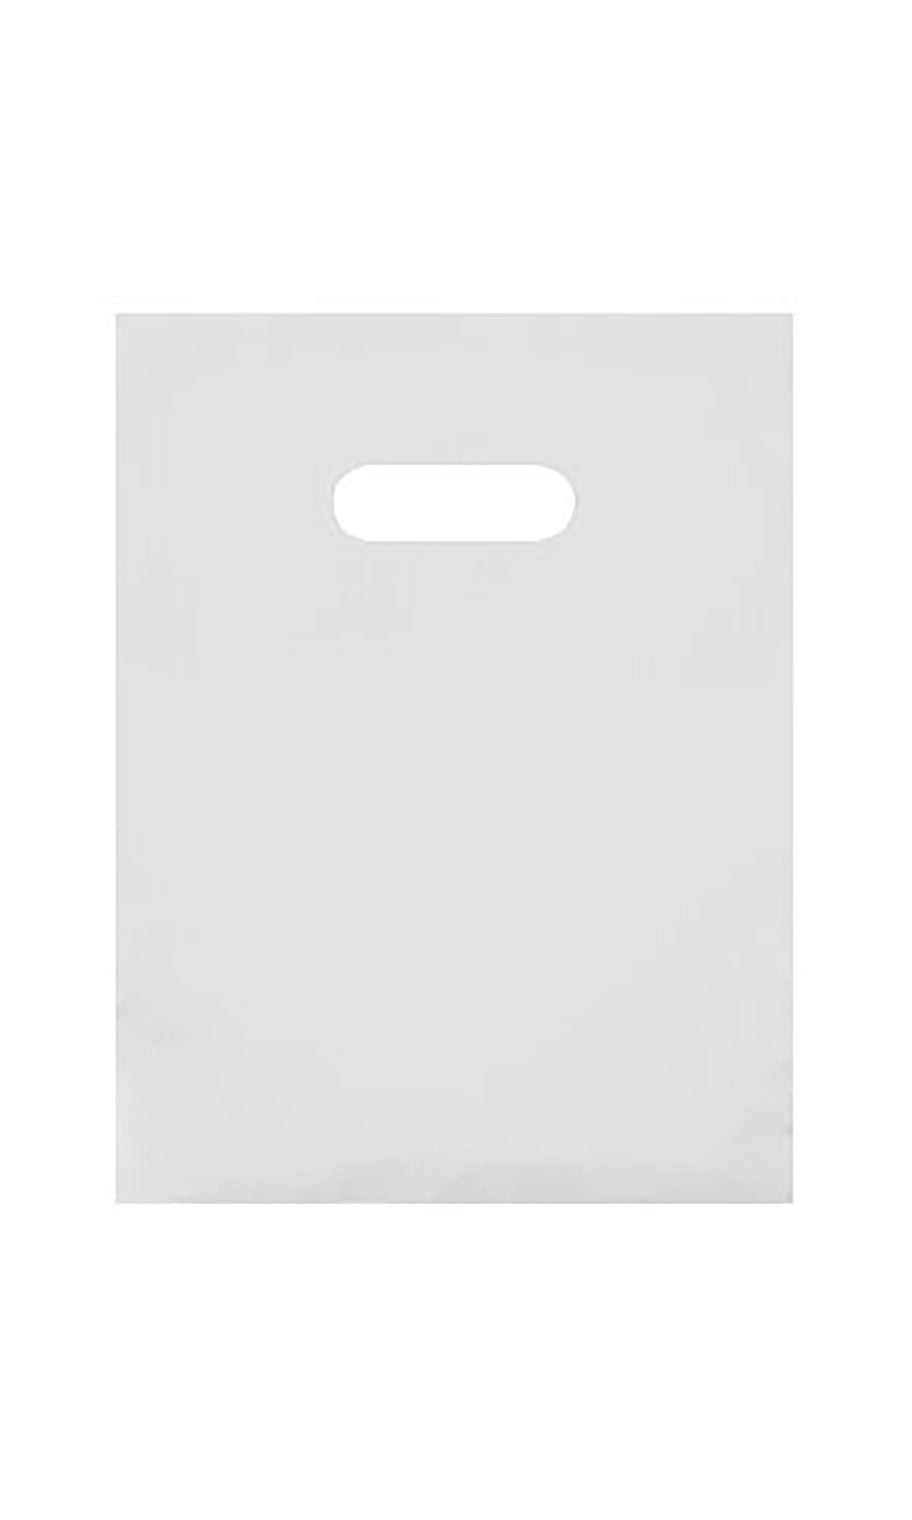 Black Cat Avenue Premium Heavy Duty Glossy Plastic Merchandise Bags with Handle 12x15,Lime 12x15 No Gusset 100-Pack 